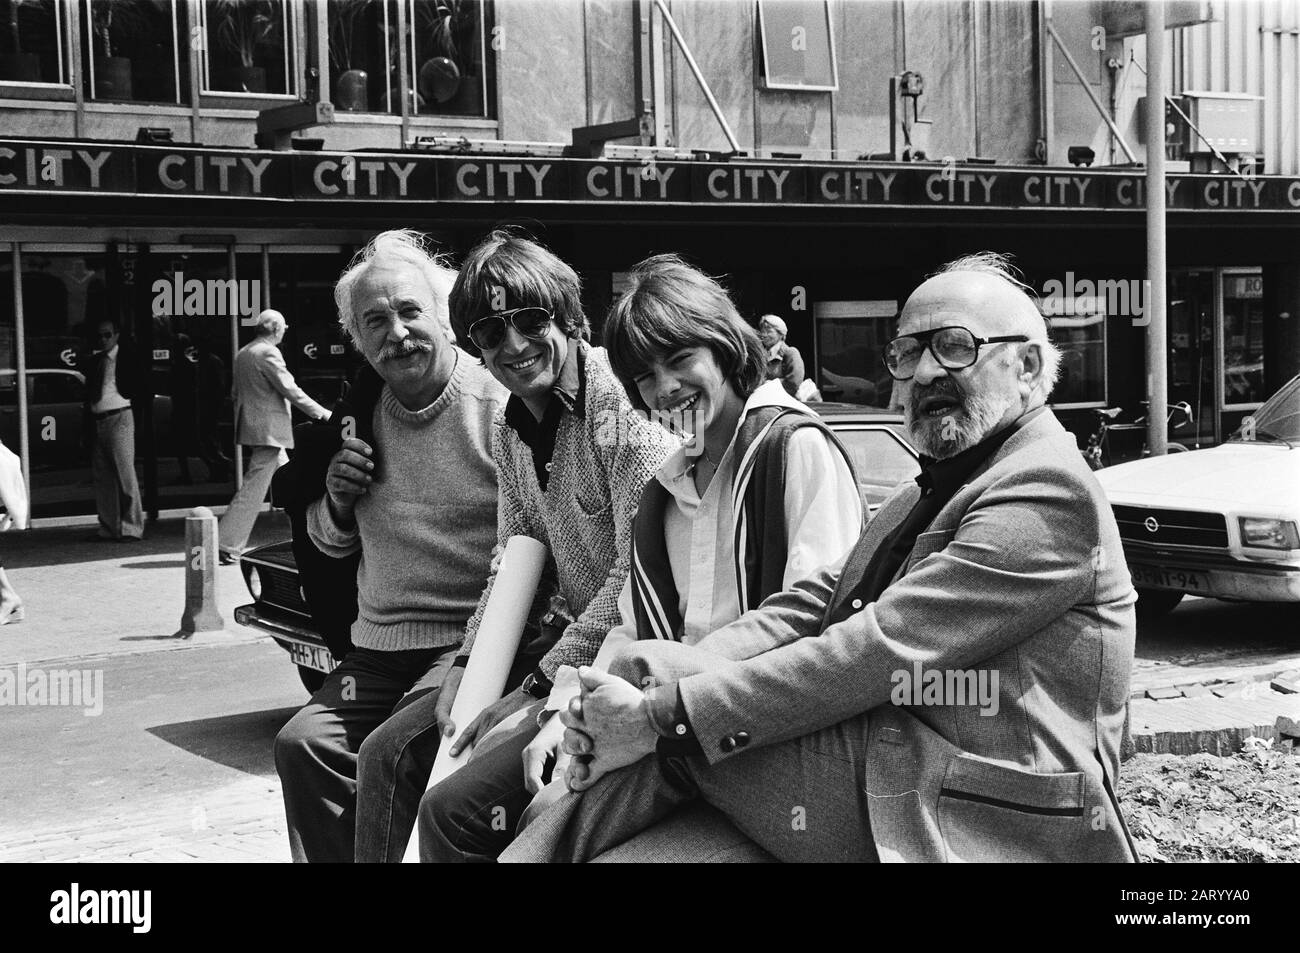 Protagonists at the premiere of Martijn and the Magier at the City-Theater in Amsterdam  V.l.n.r. Lex Goudsmit, Jeroen Krabbé, Bart Gabrielse (Martijn) and Alexander Pola Date: 3 July 1979 Location: Amsterdam, Noord-Holland Keywords: actors, cinemas, films, premieres Personal name: Gabrielse, Bart, Goudsmit, Lex, Krabbé, Jeroen, Pola, Alexander Stock Photo